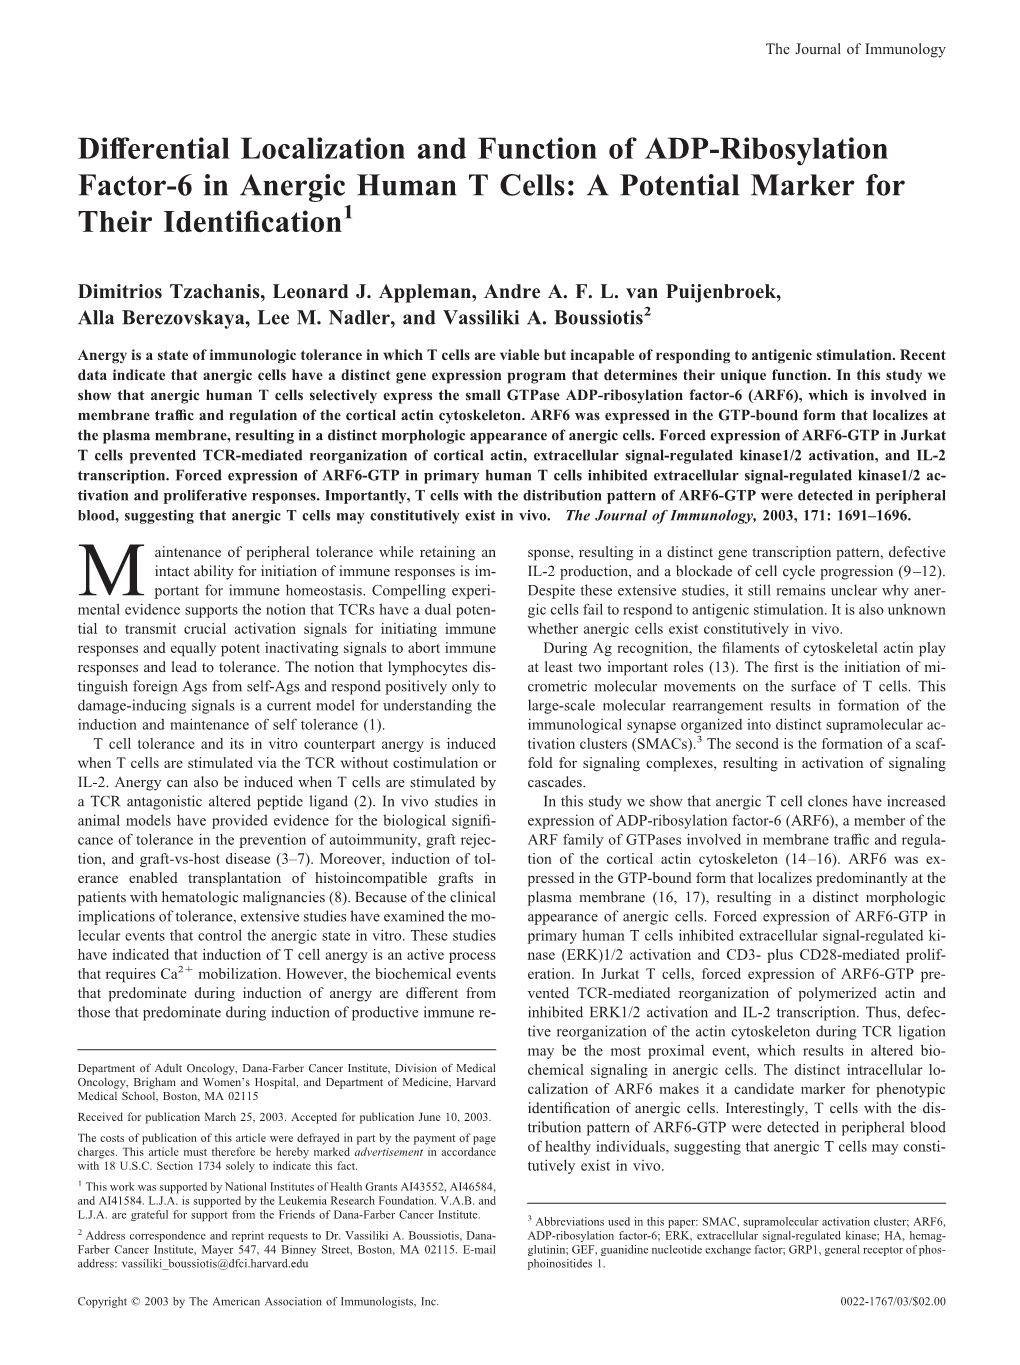 Identification Human T Cells: a Potential Marker for Their ADP